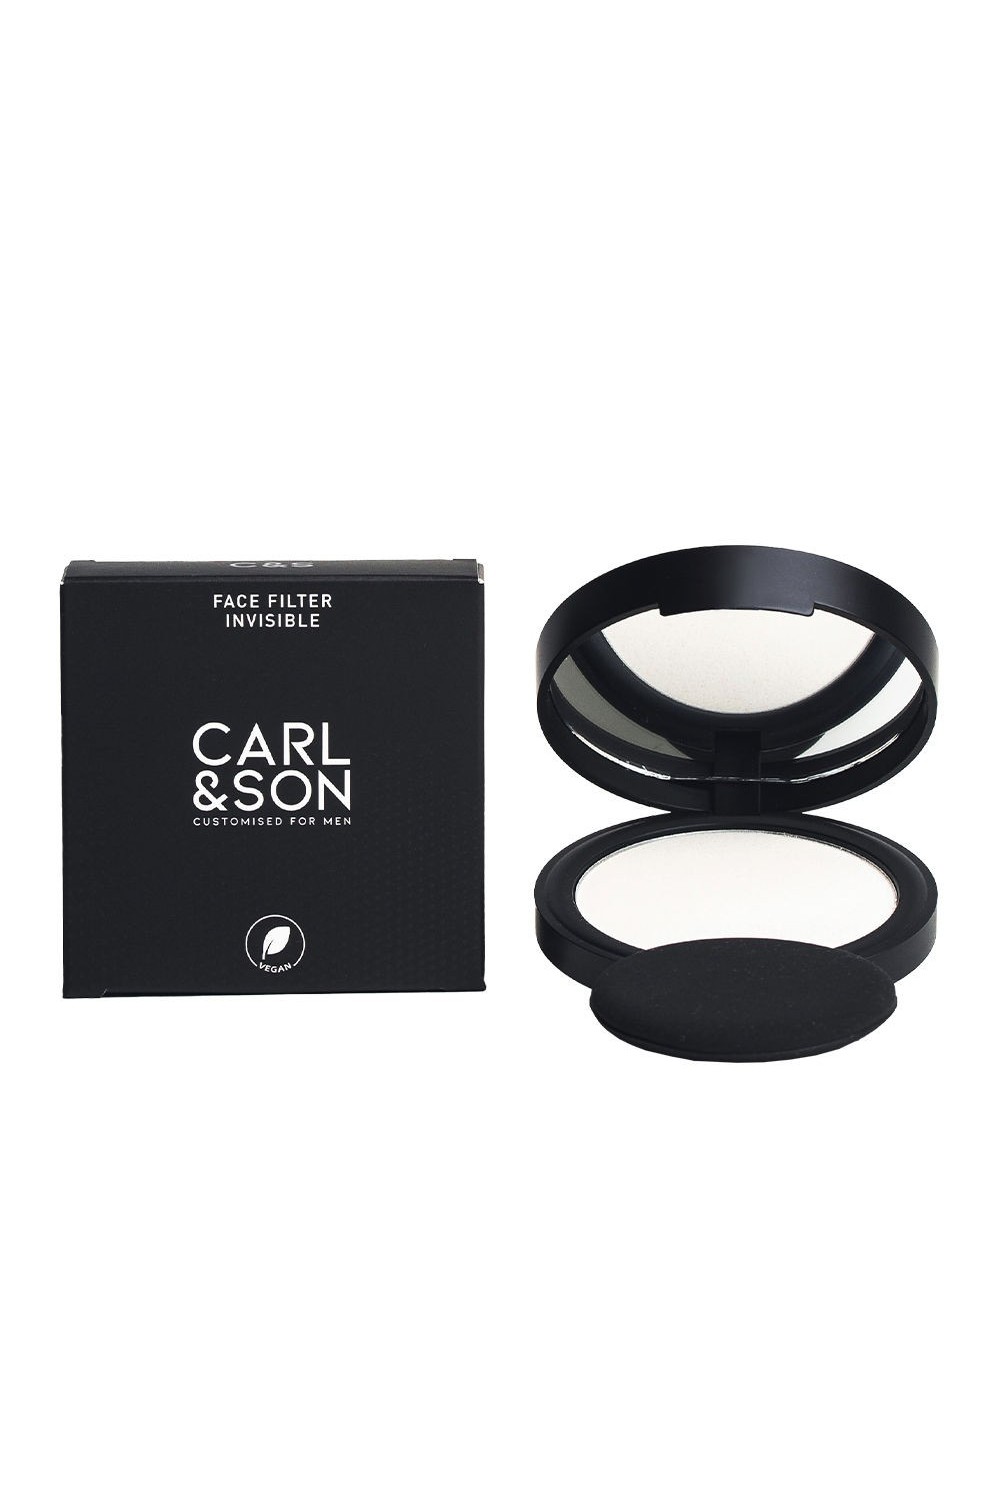 CARL&SON - Carl & Son Face Filter Invisible 1 Transparent 7,6g